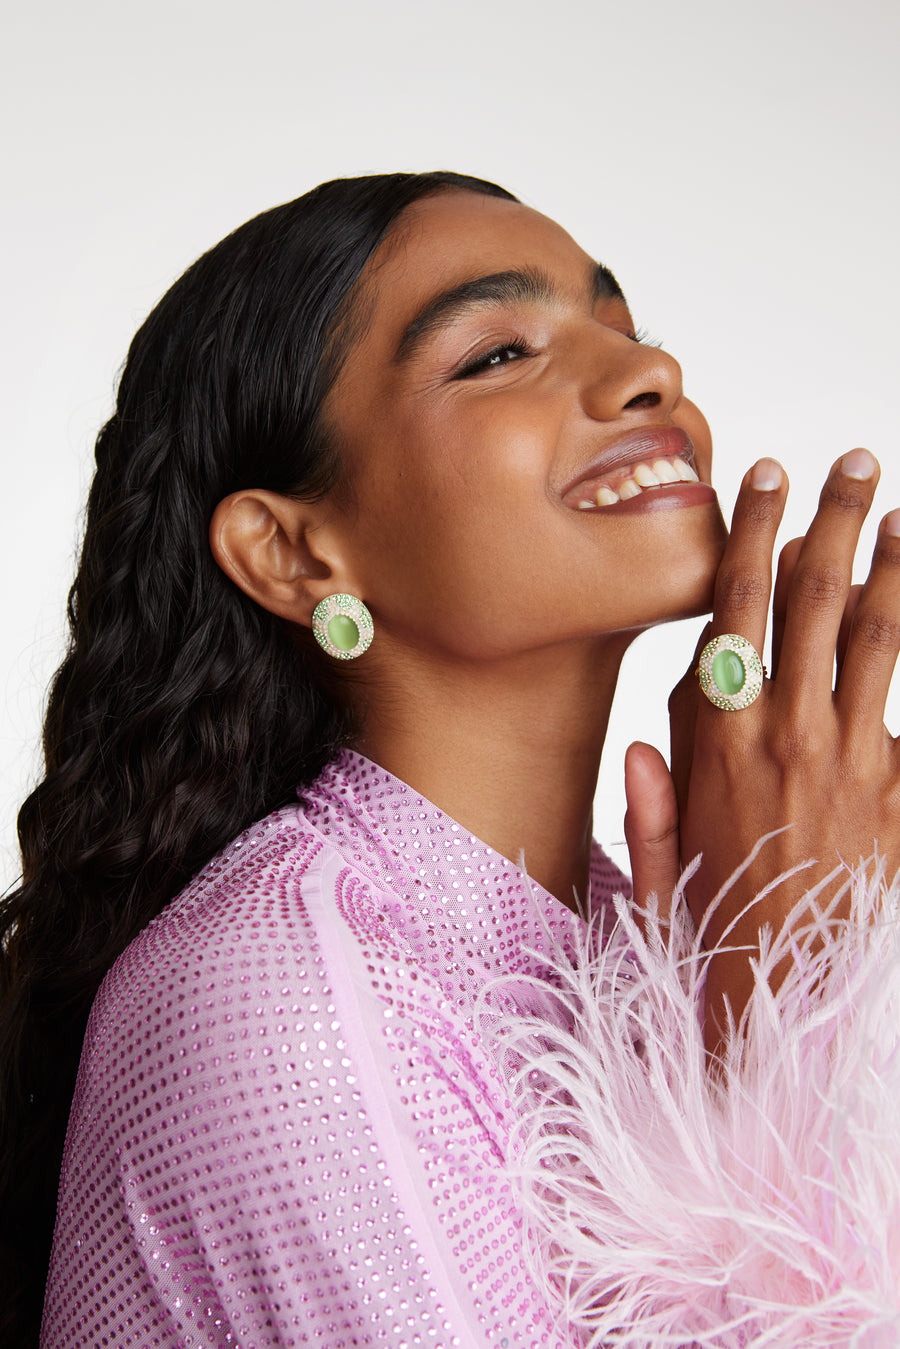 Model shot wearing the Soru jewellery chunky green stone and crystal ring and matching stud earrings while laughing with head tilted back